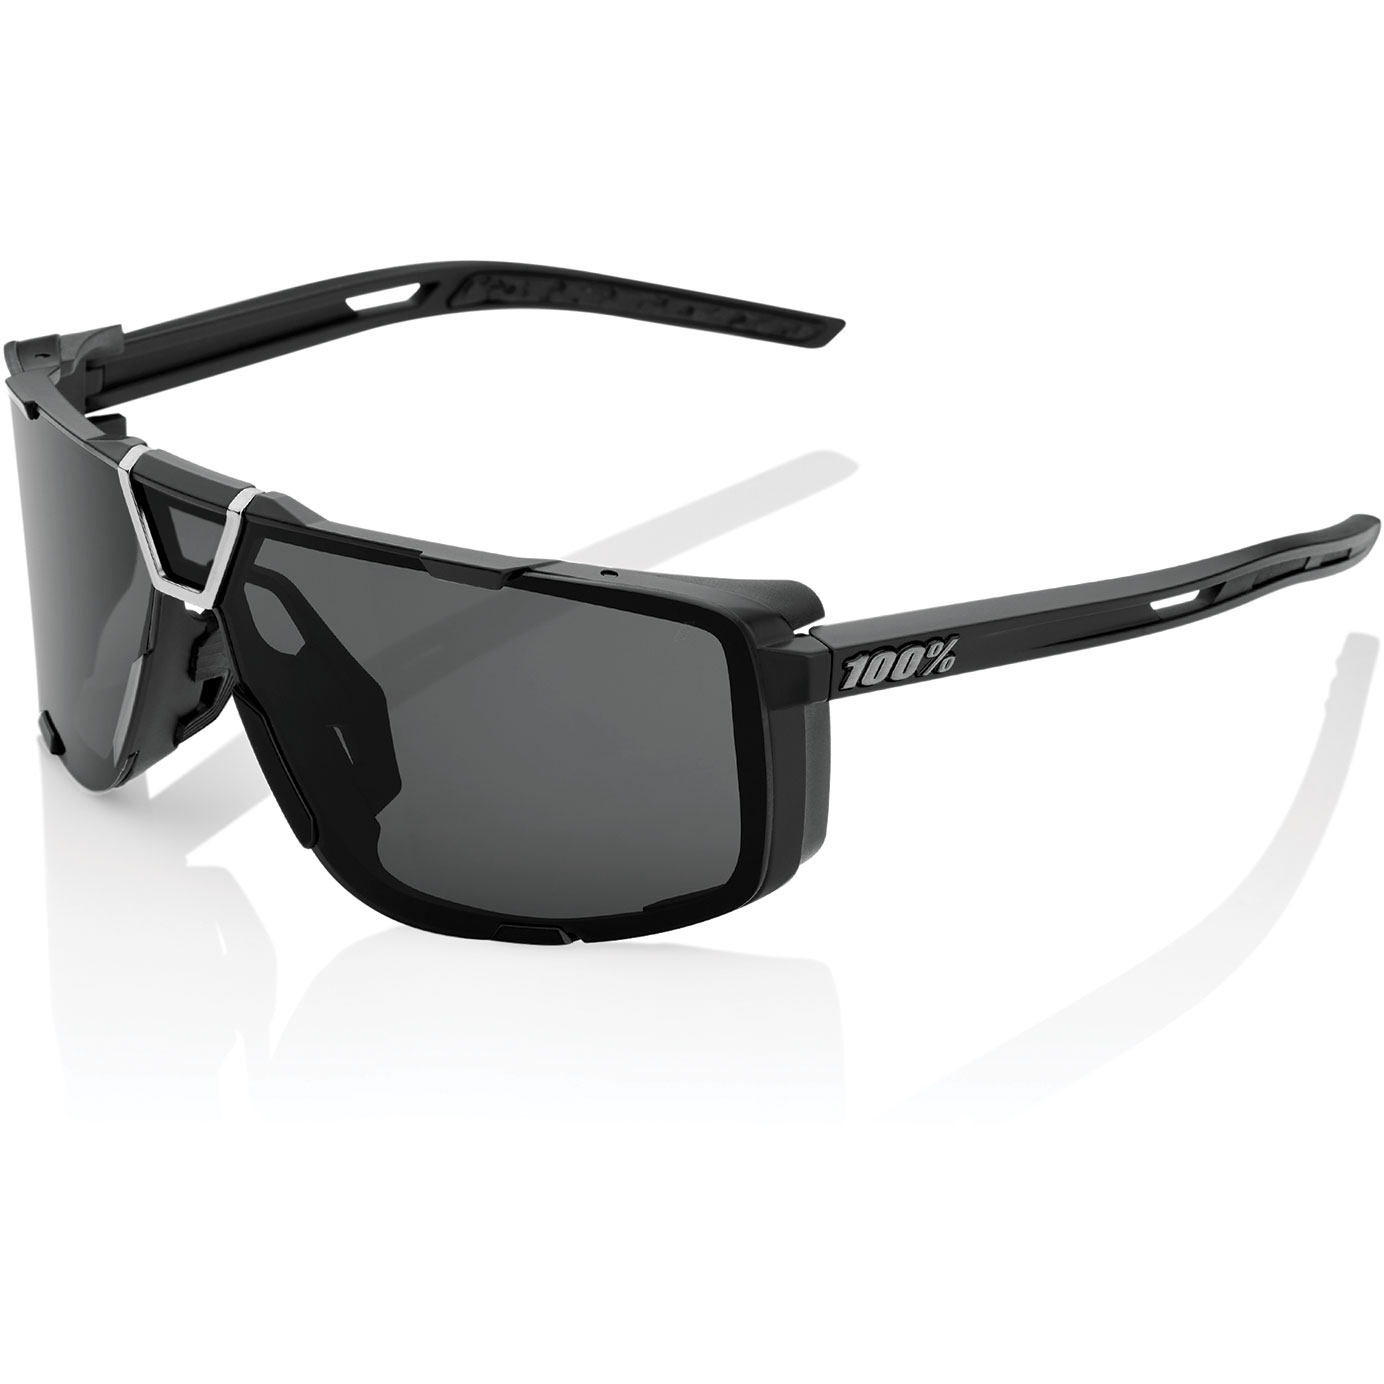 Picture of 100% Eastcraft Glasses - Smoke Lens - Matte Black